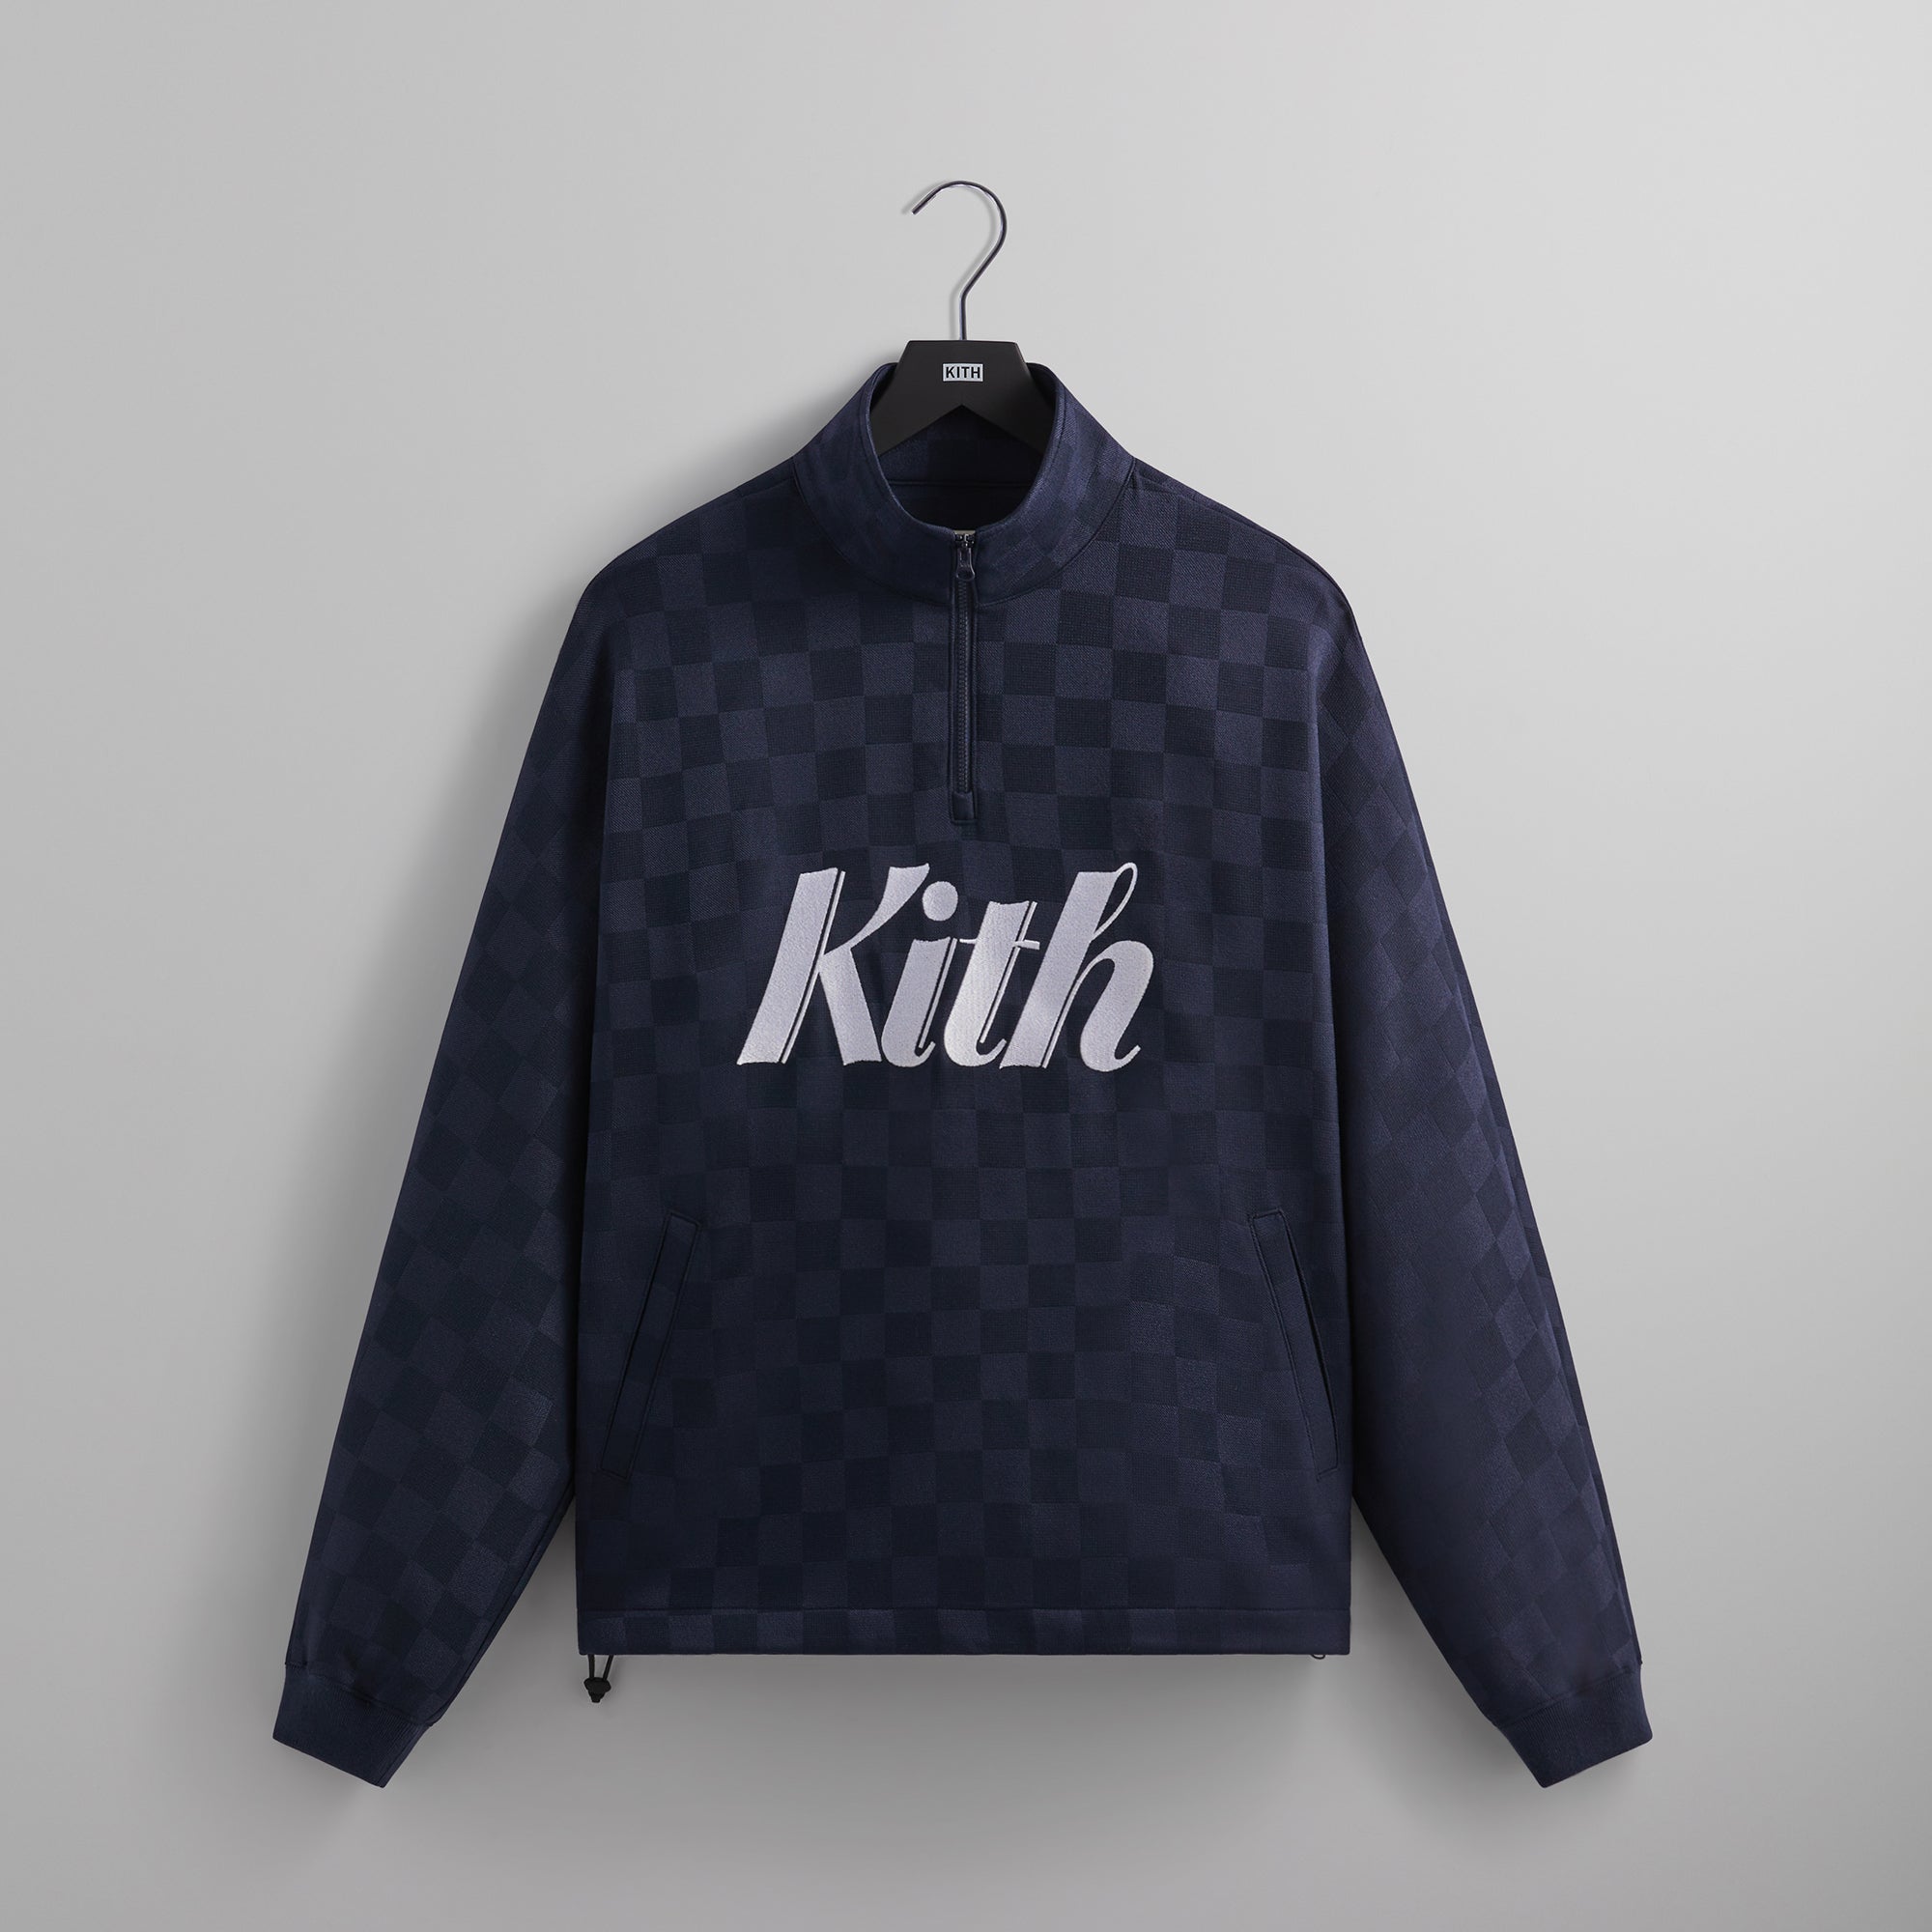 Kith Double Knit Davis Quarter Zip Pullover - Nocturnal